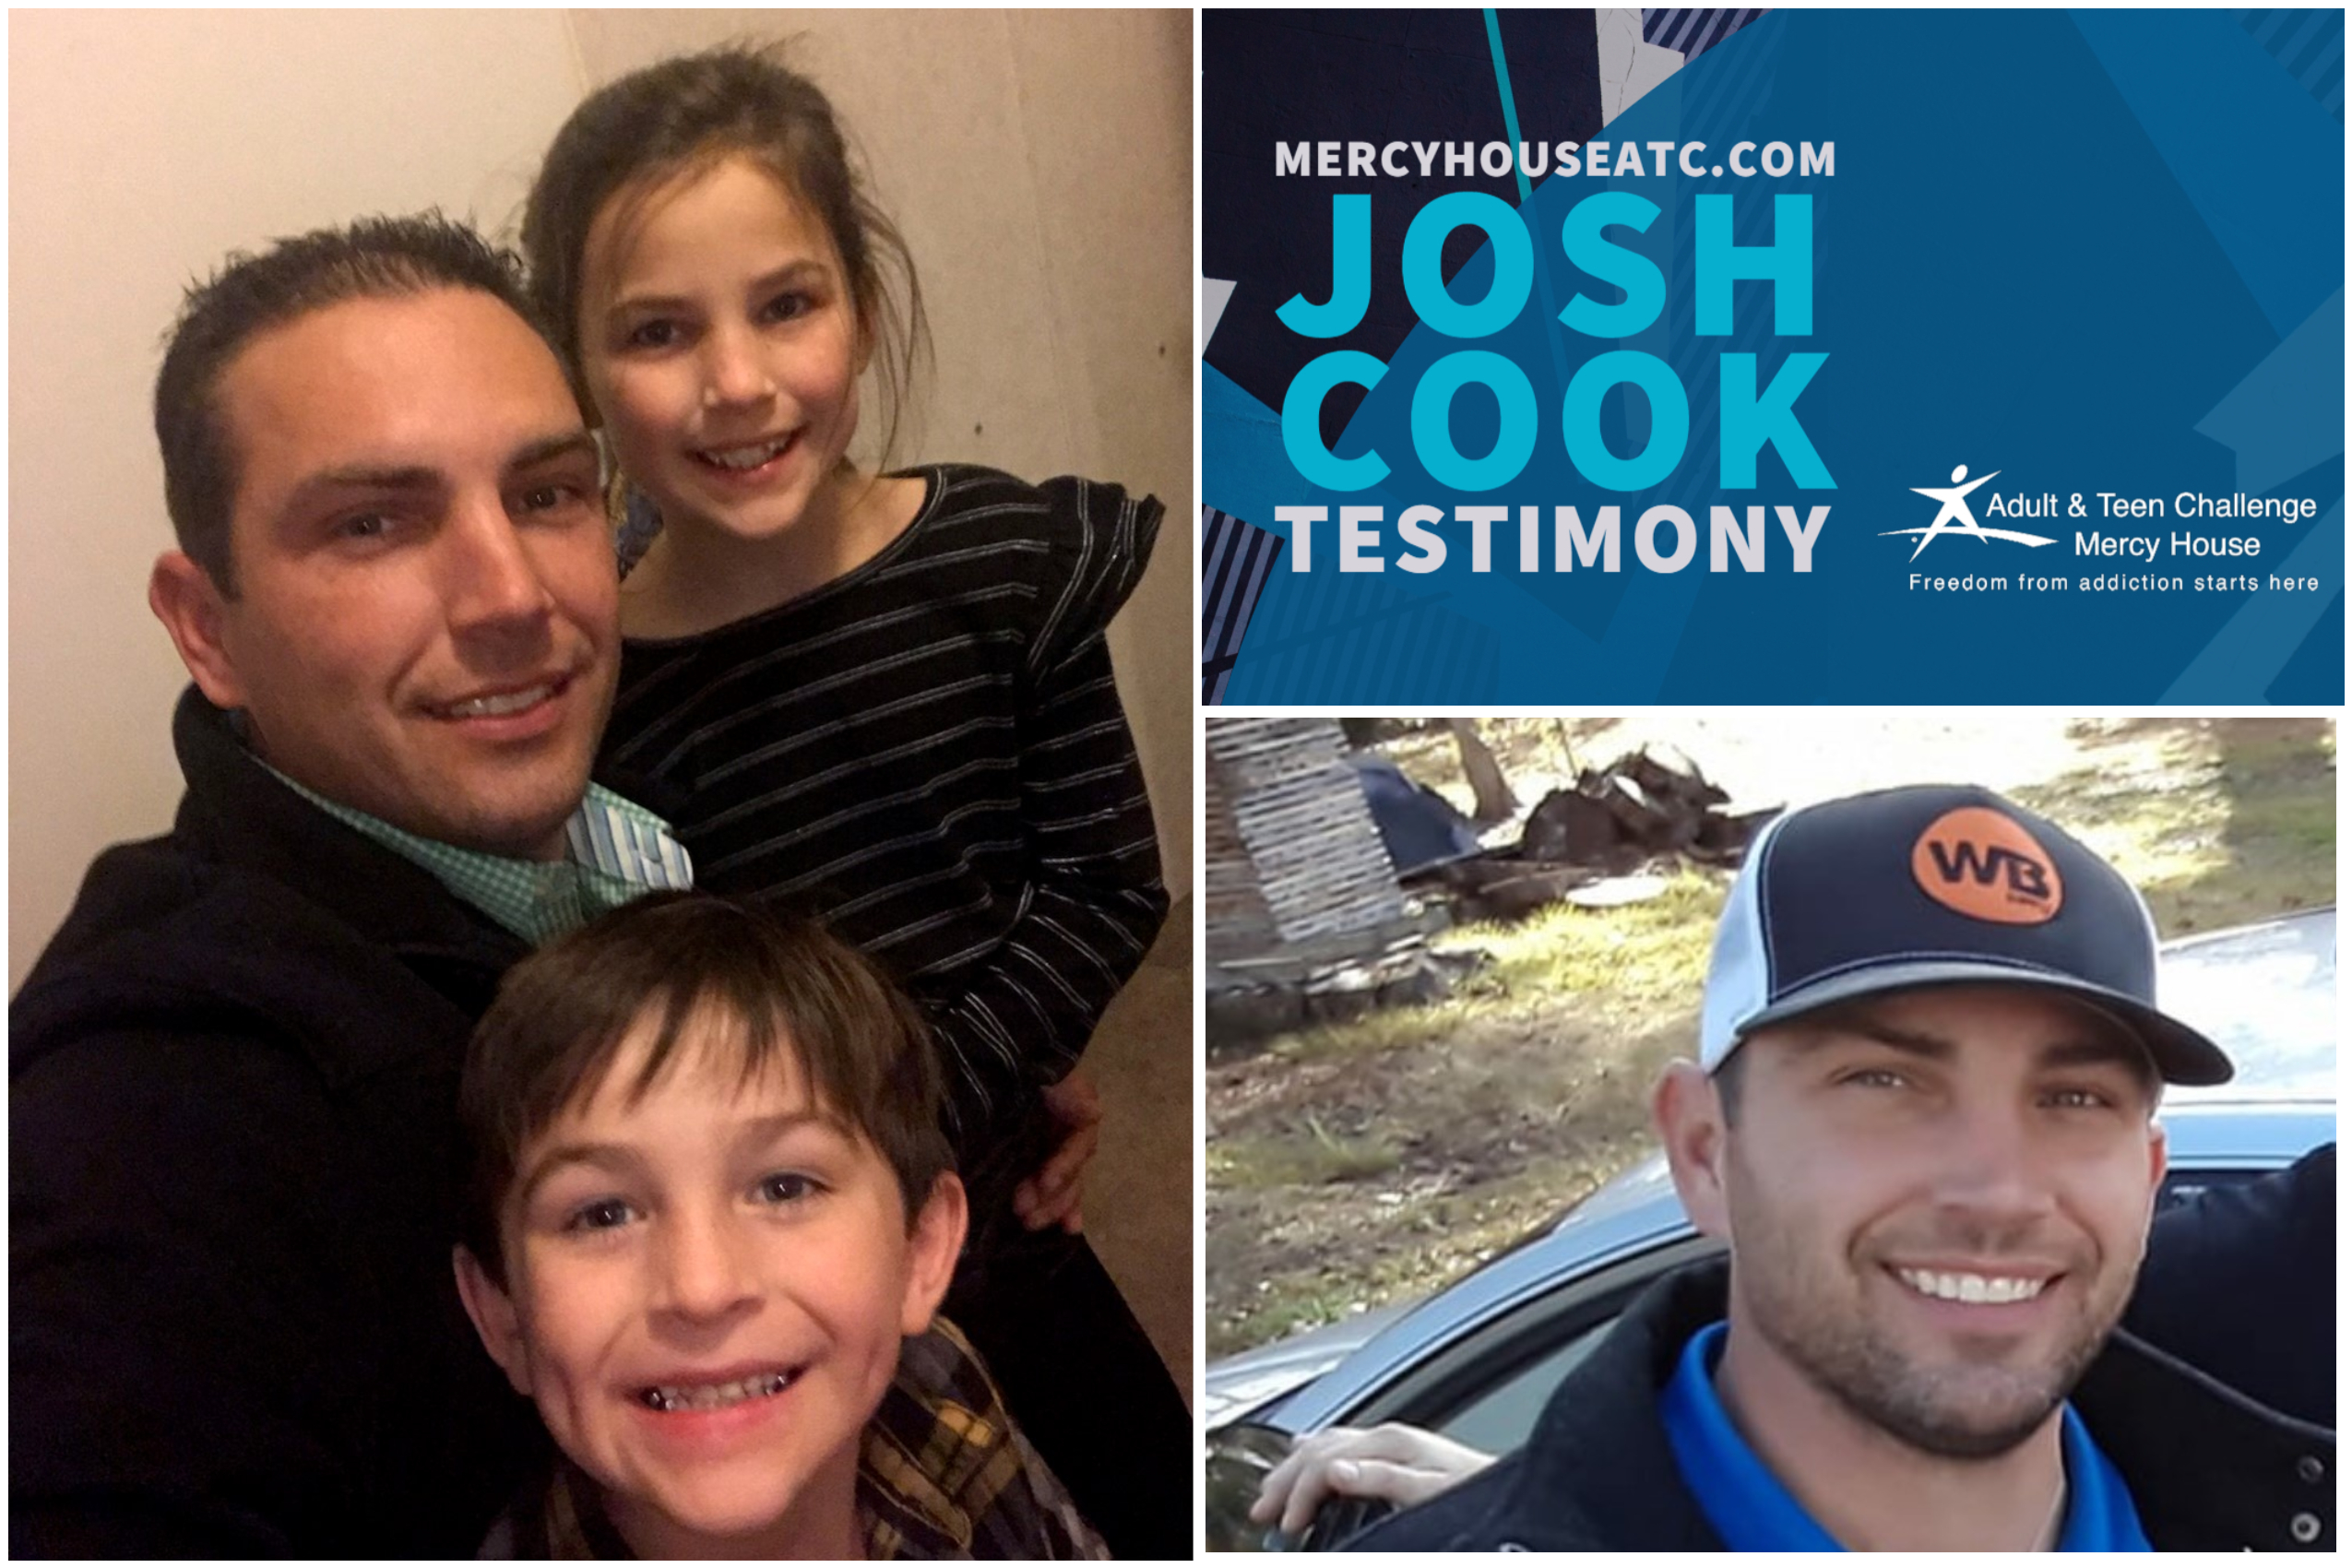 Josh Cook Video Testimony Cover With Kids 3_2